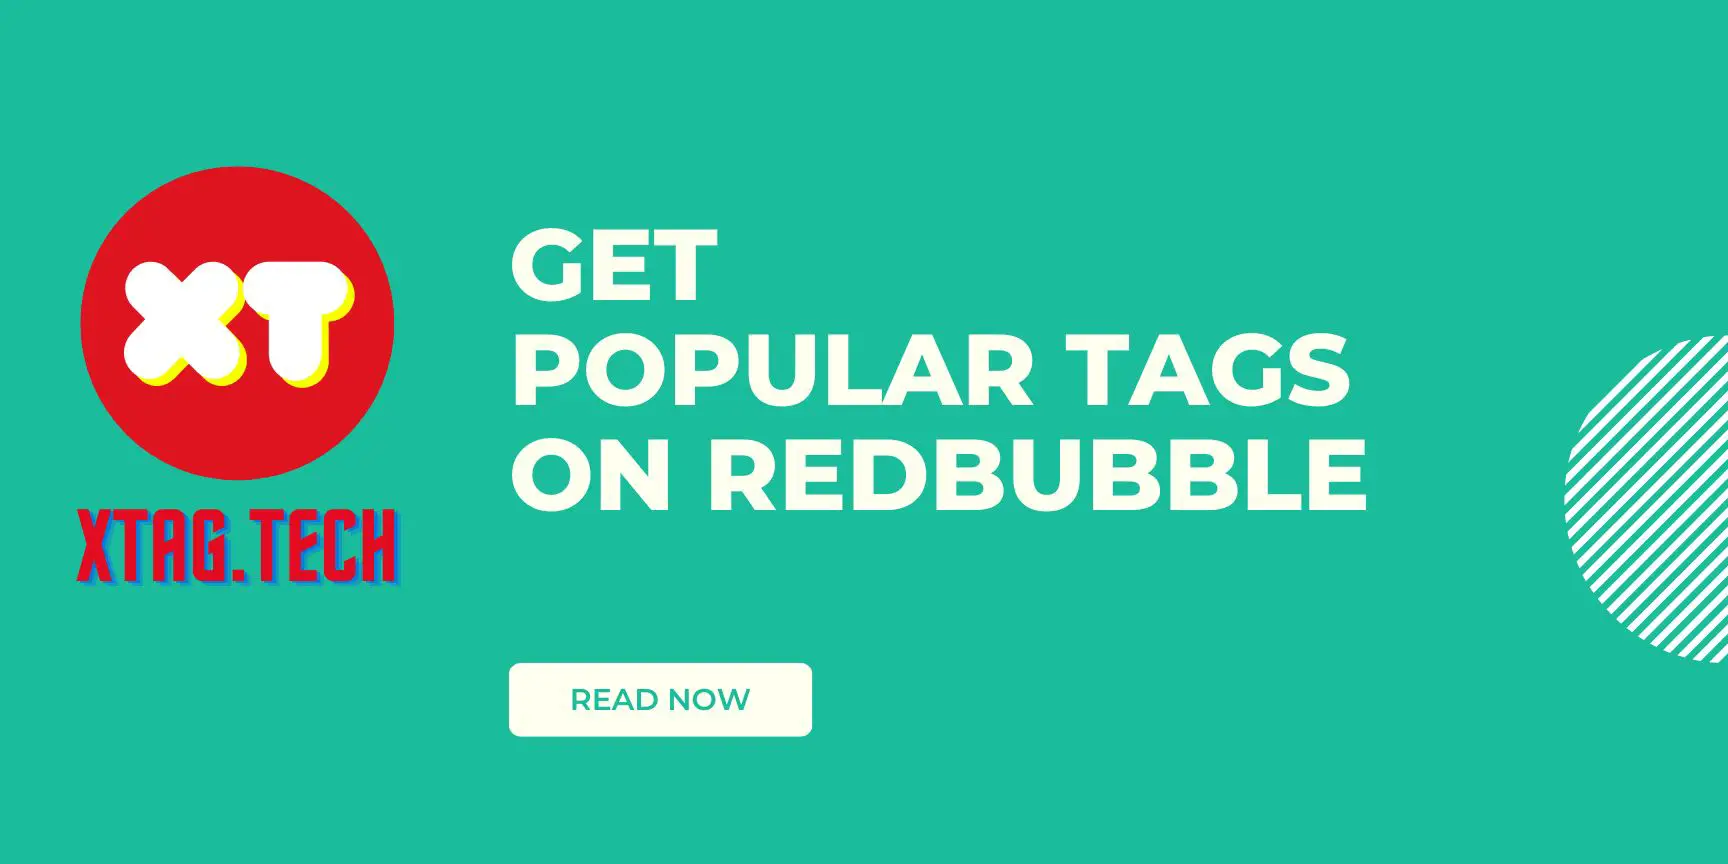 How to Get Popular Tags on Redbubble 2022